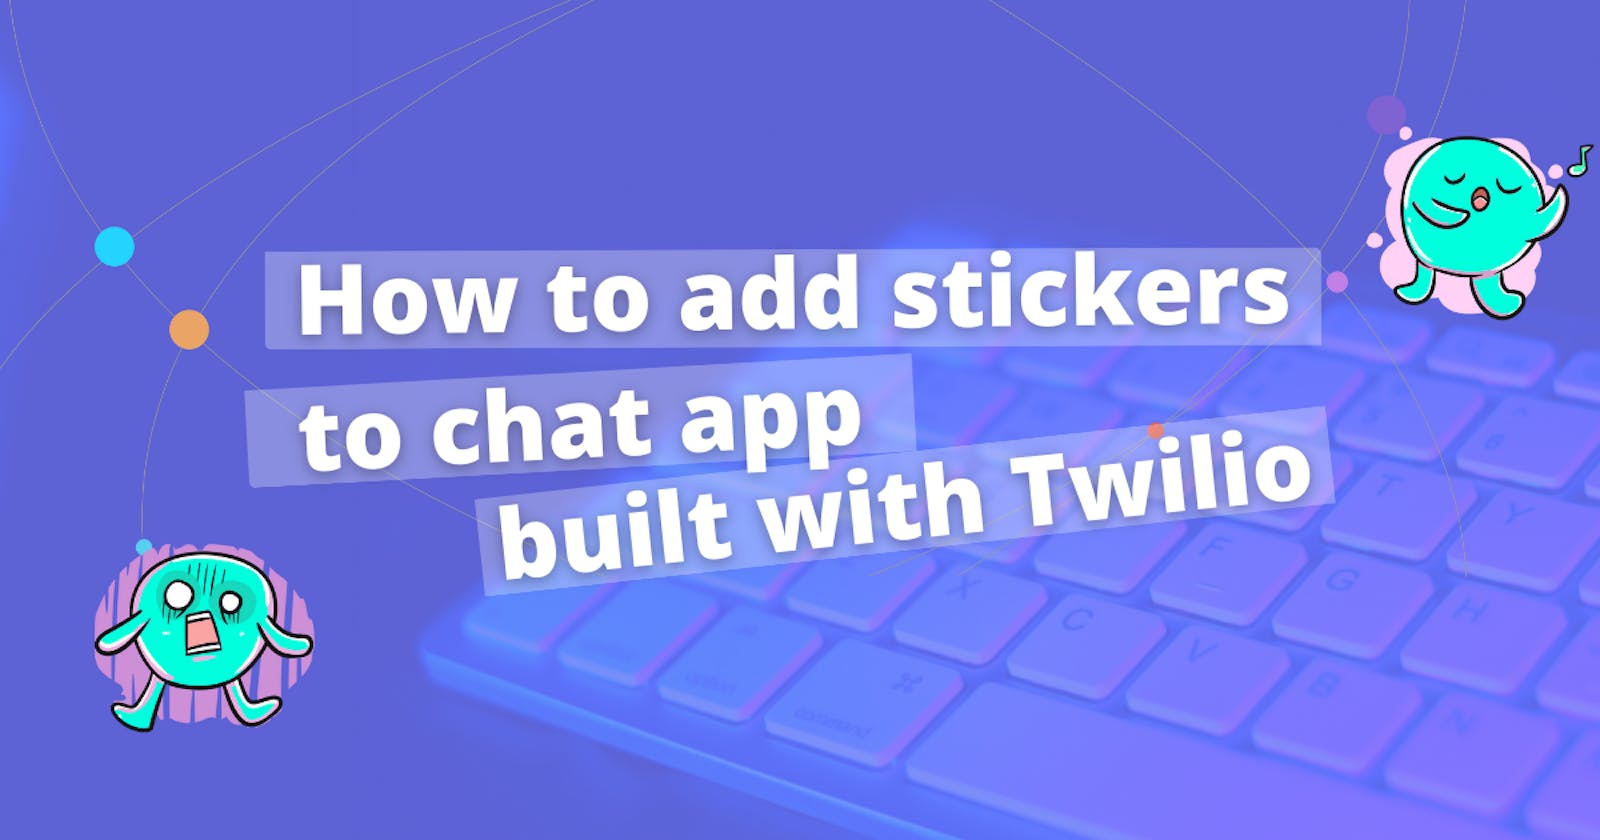 How to add stickers to Android chat app built with Twilio